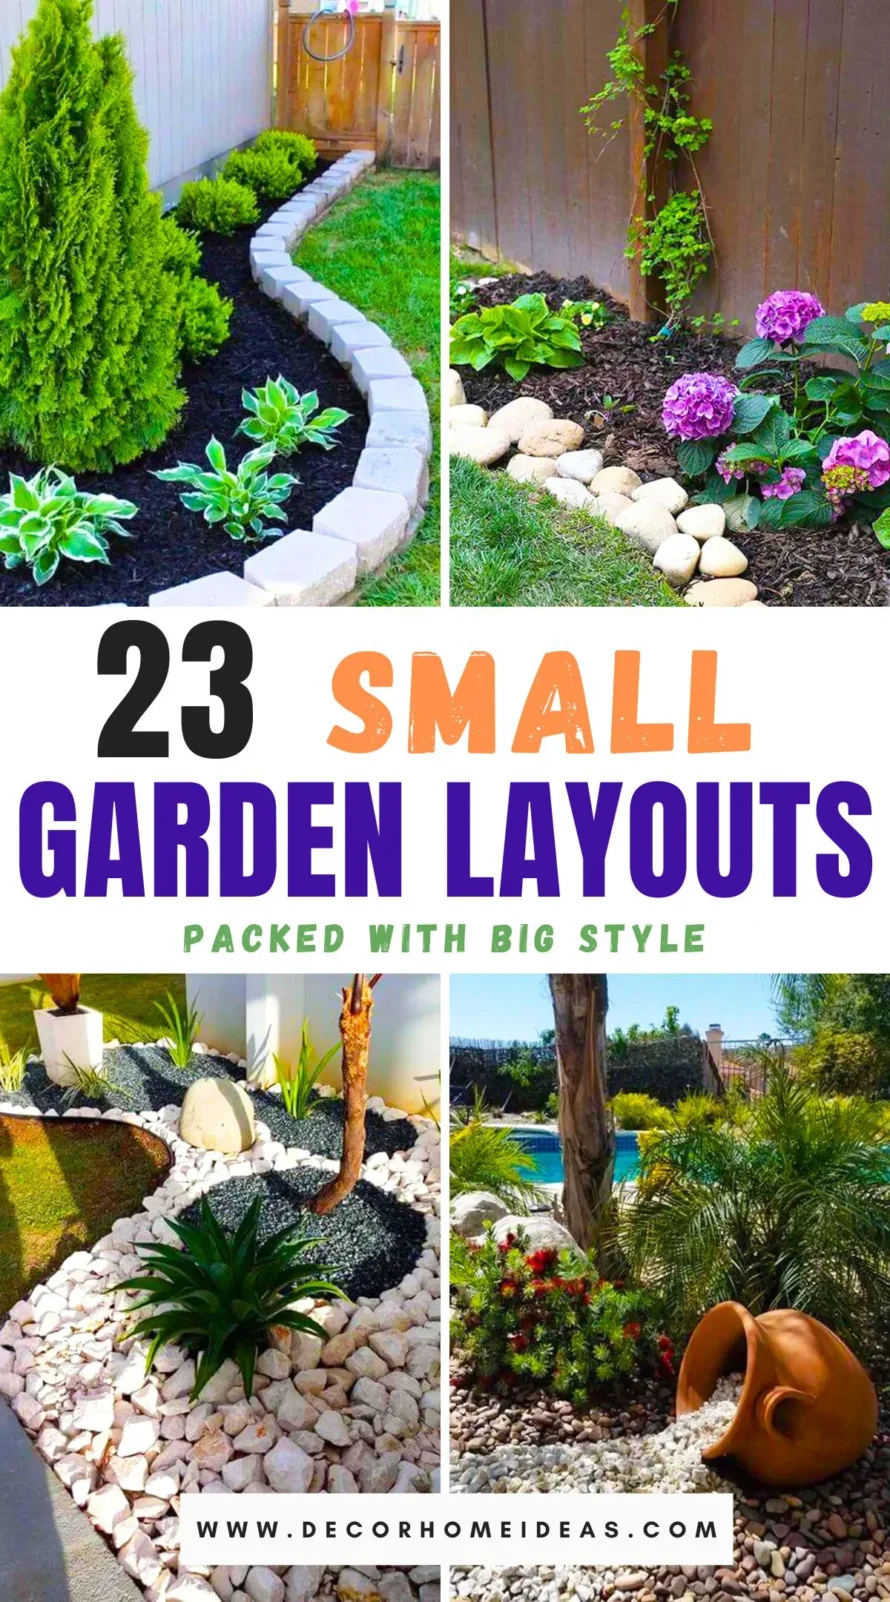 Discover 23 brilliant small garden designs to elevate your oasis. From vertical gardens to cozy courtyard retreats, these clever ideas maximize space and charm, creating intimate outdoor sanctuaries that captivate the senses and inspire relaxation.